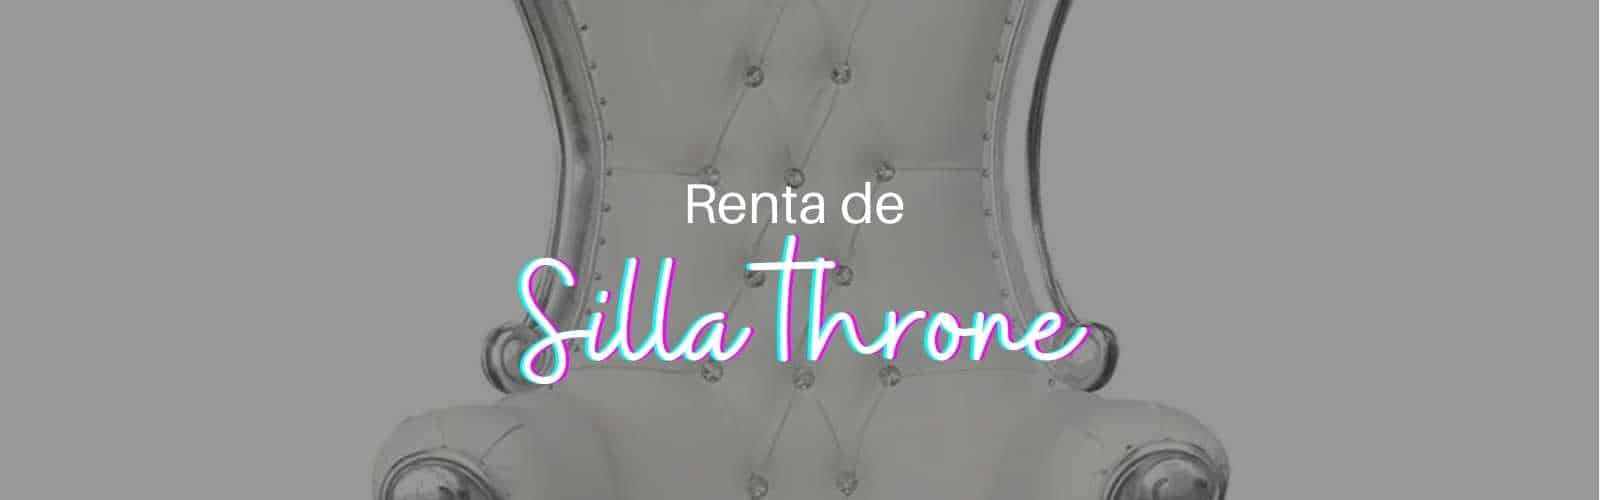 Throne Chair Rental for Baby Shower